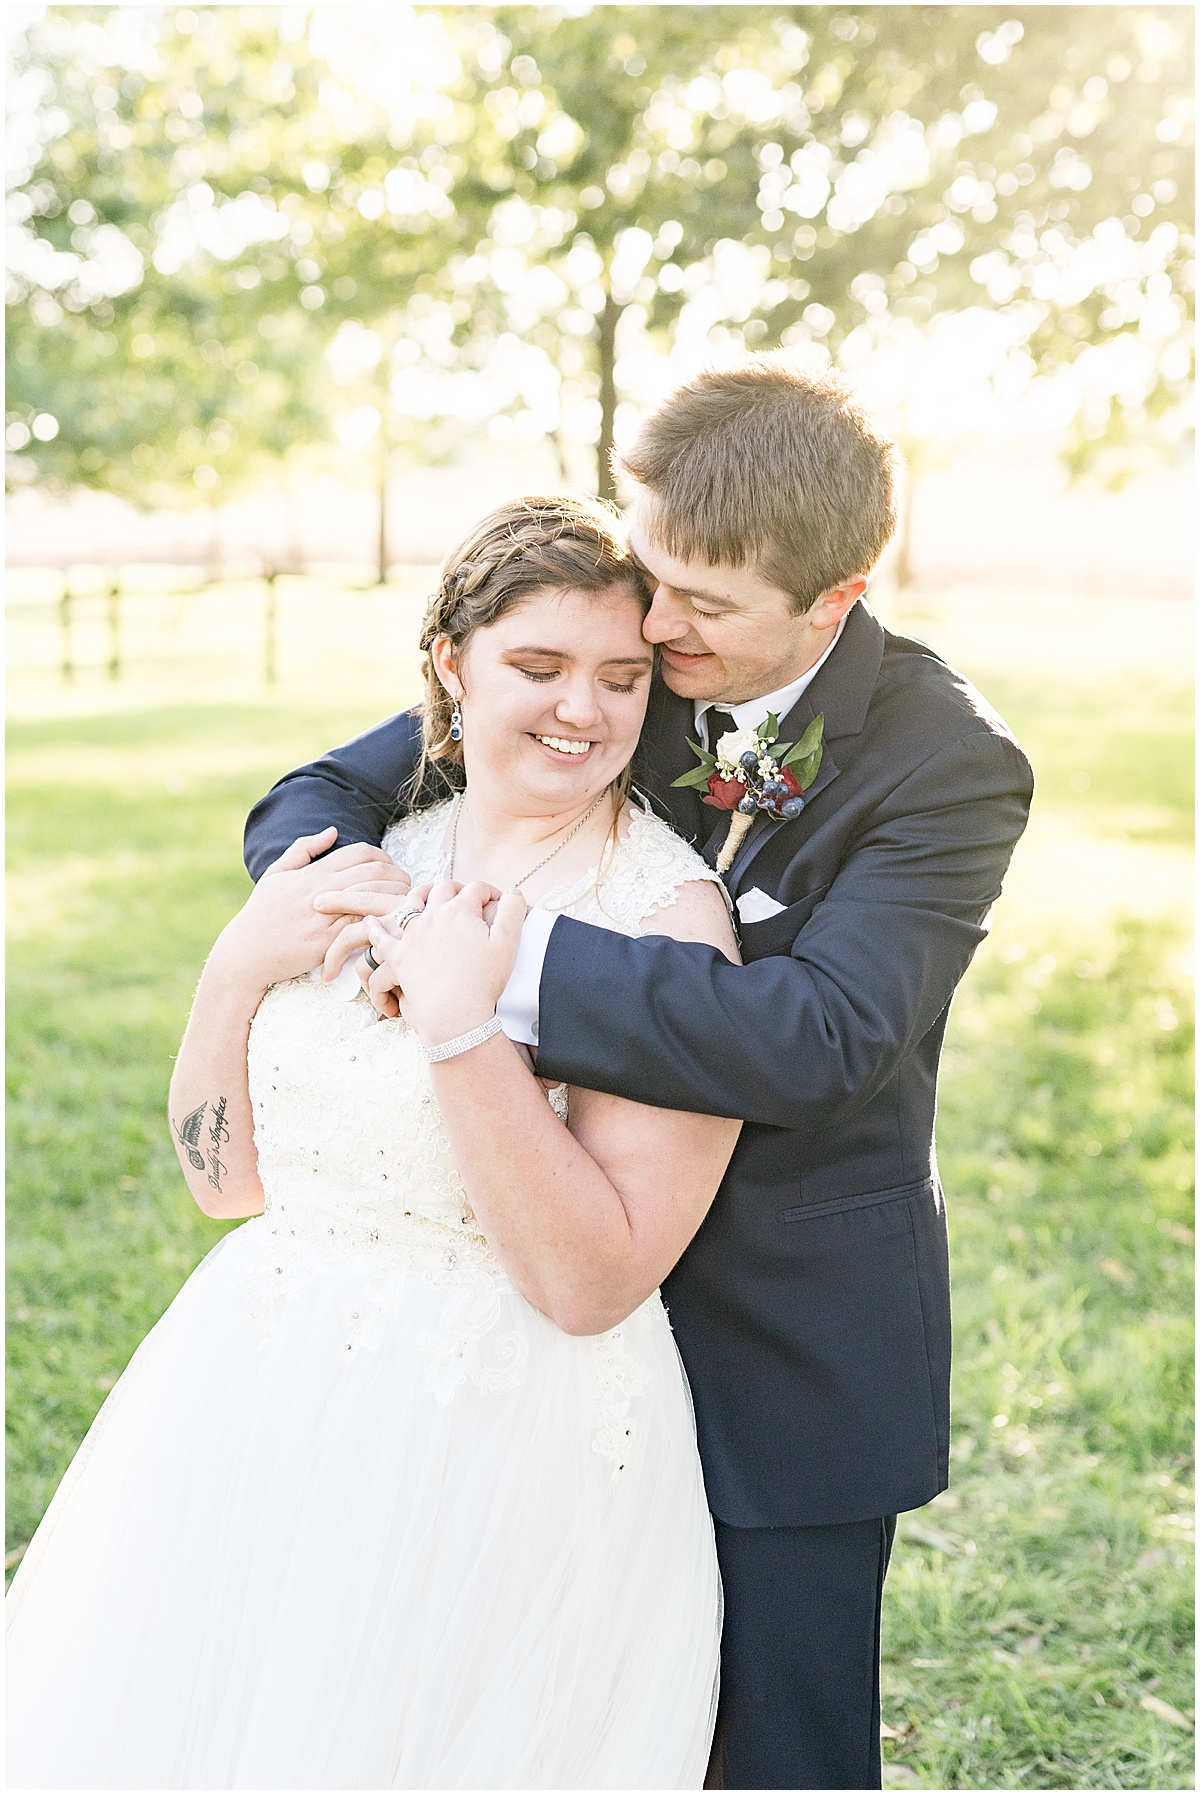 Just married photos after fall wedding at Vintage Oaks Banquet Barn in Delphi, Indiana